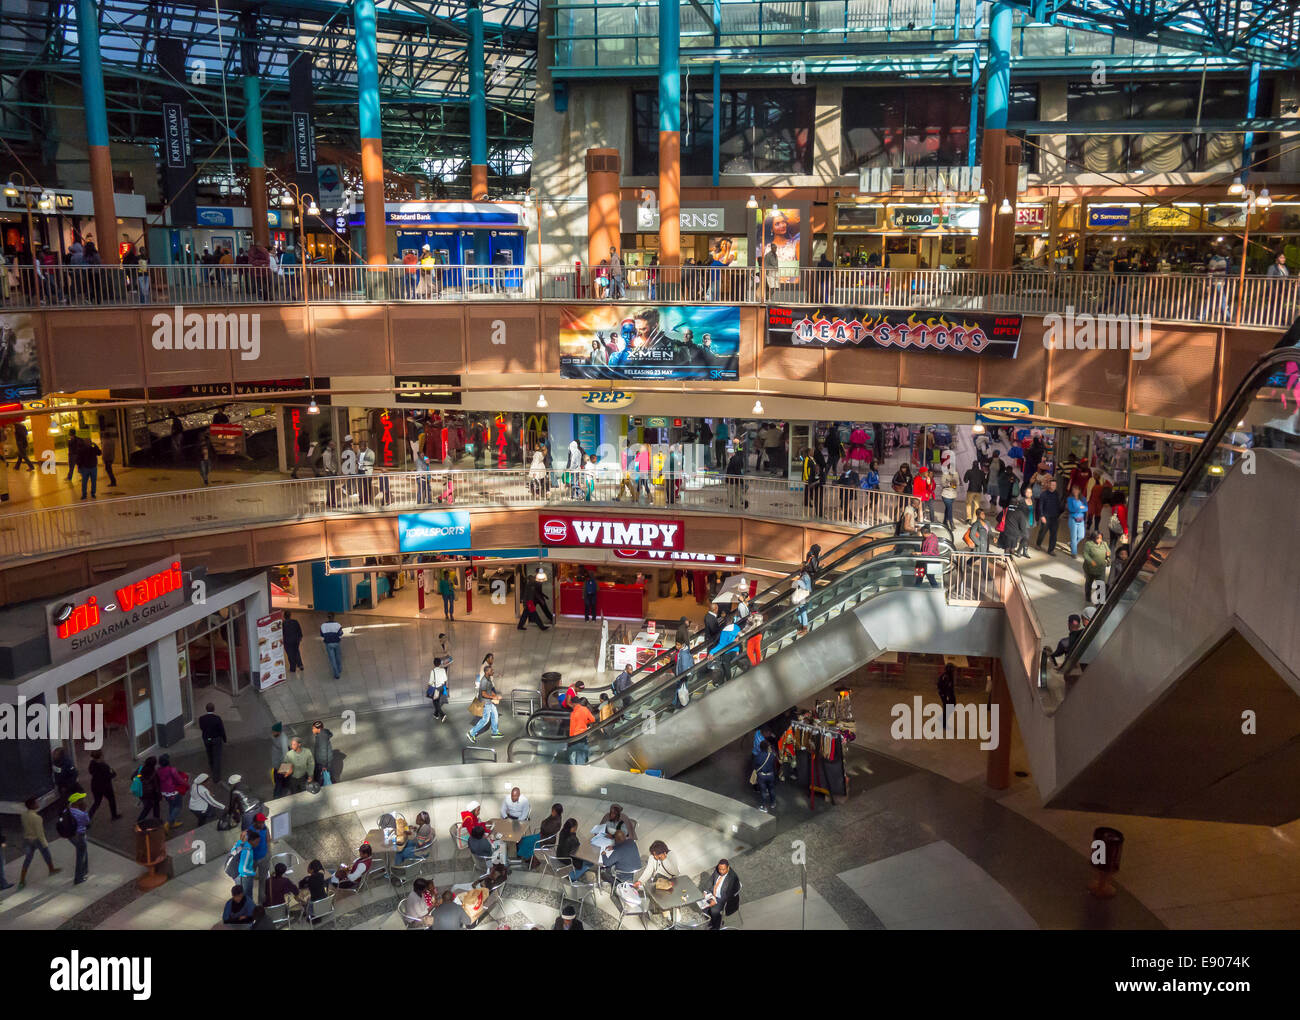 JOHANNESBURG, SOUTH AFRICA - People in shopping center, in Carlton Centre. Stock Photo